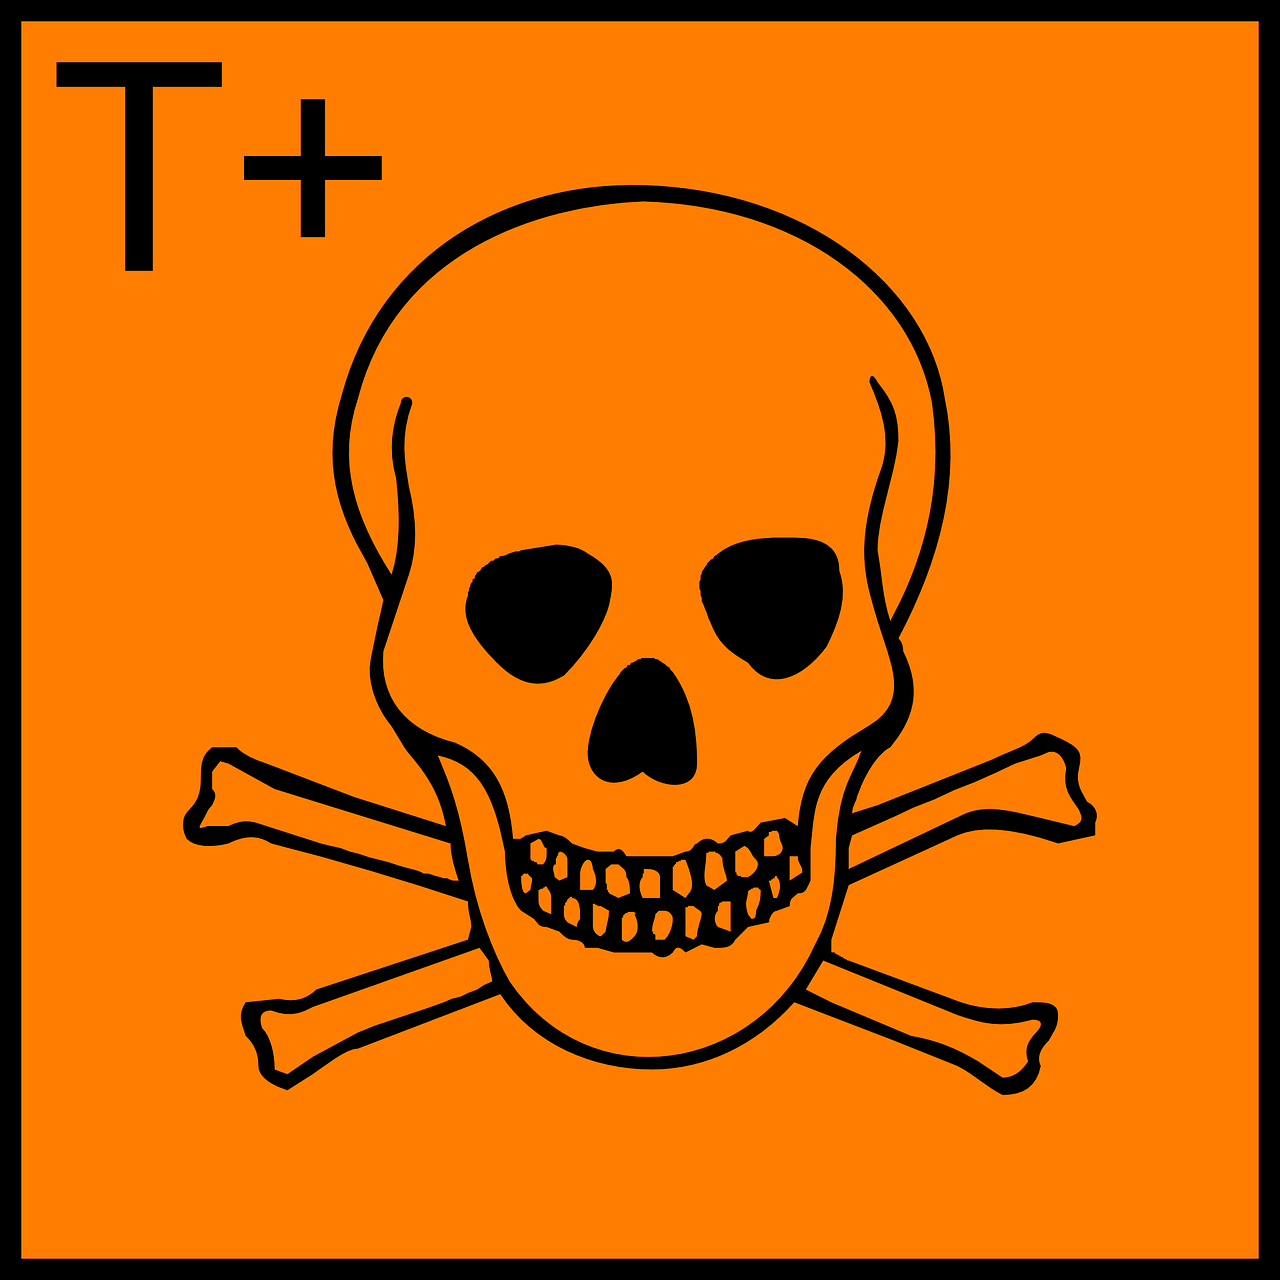 a skull and crossbones on an orange background, by Bradley Walker Tomlin, vanitas, periodic table, orange safety labels, tf 1, square